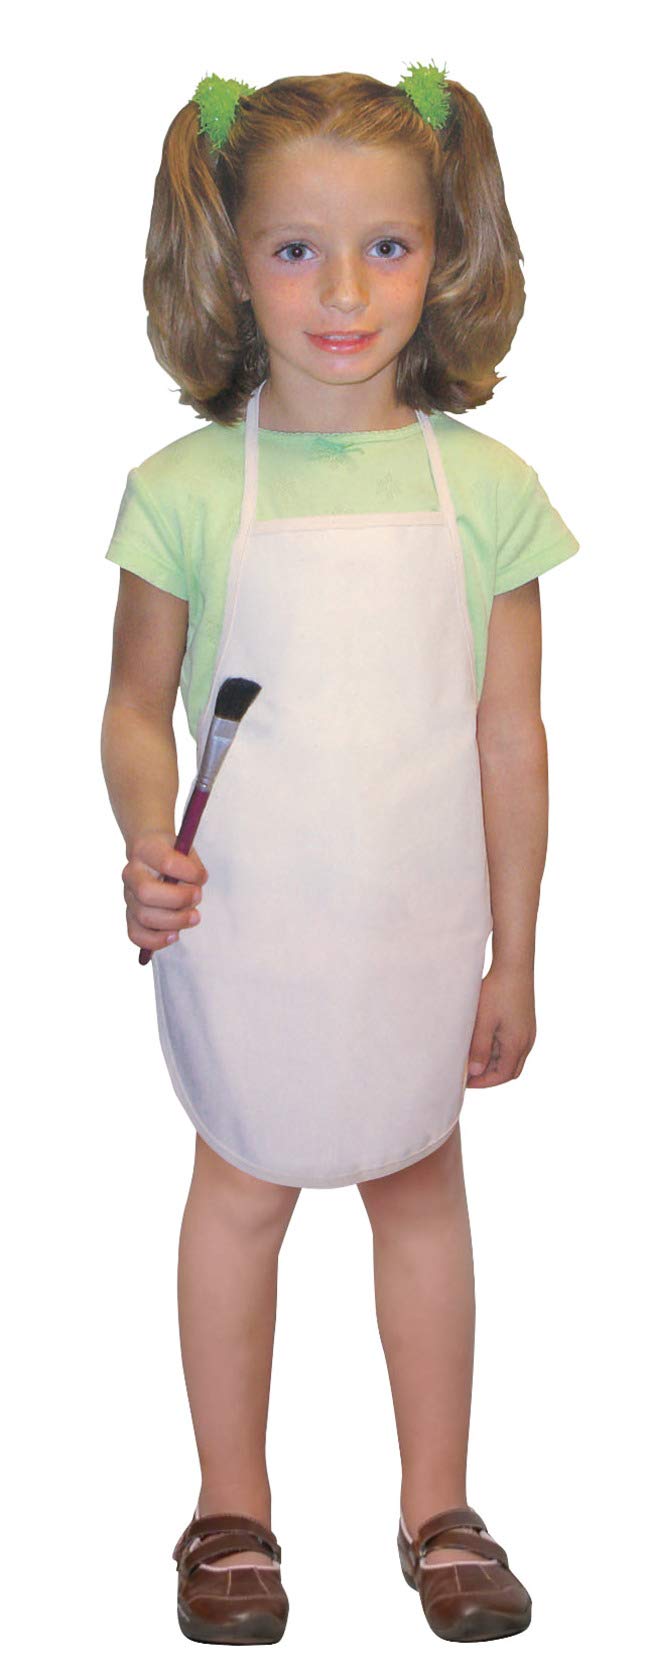 Canvas Corp Children's Apron, 14 x 18 Inches, Natural